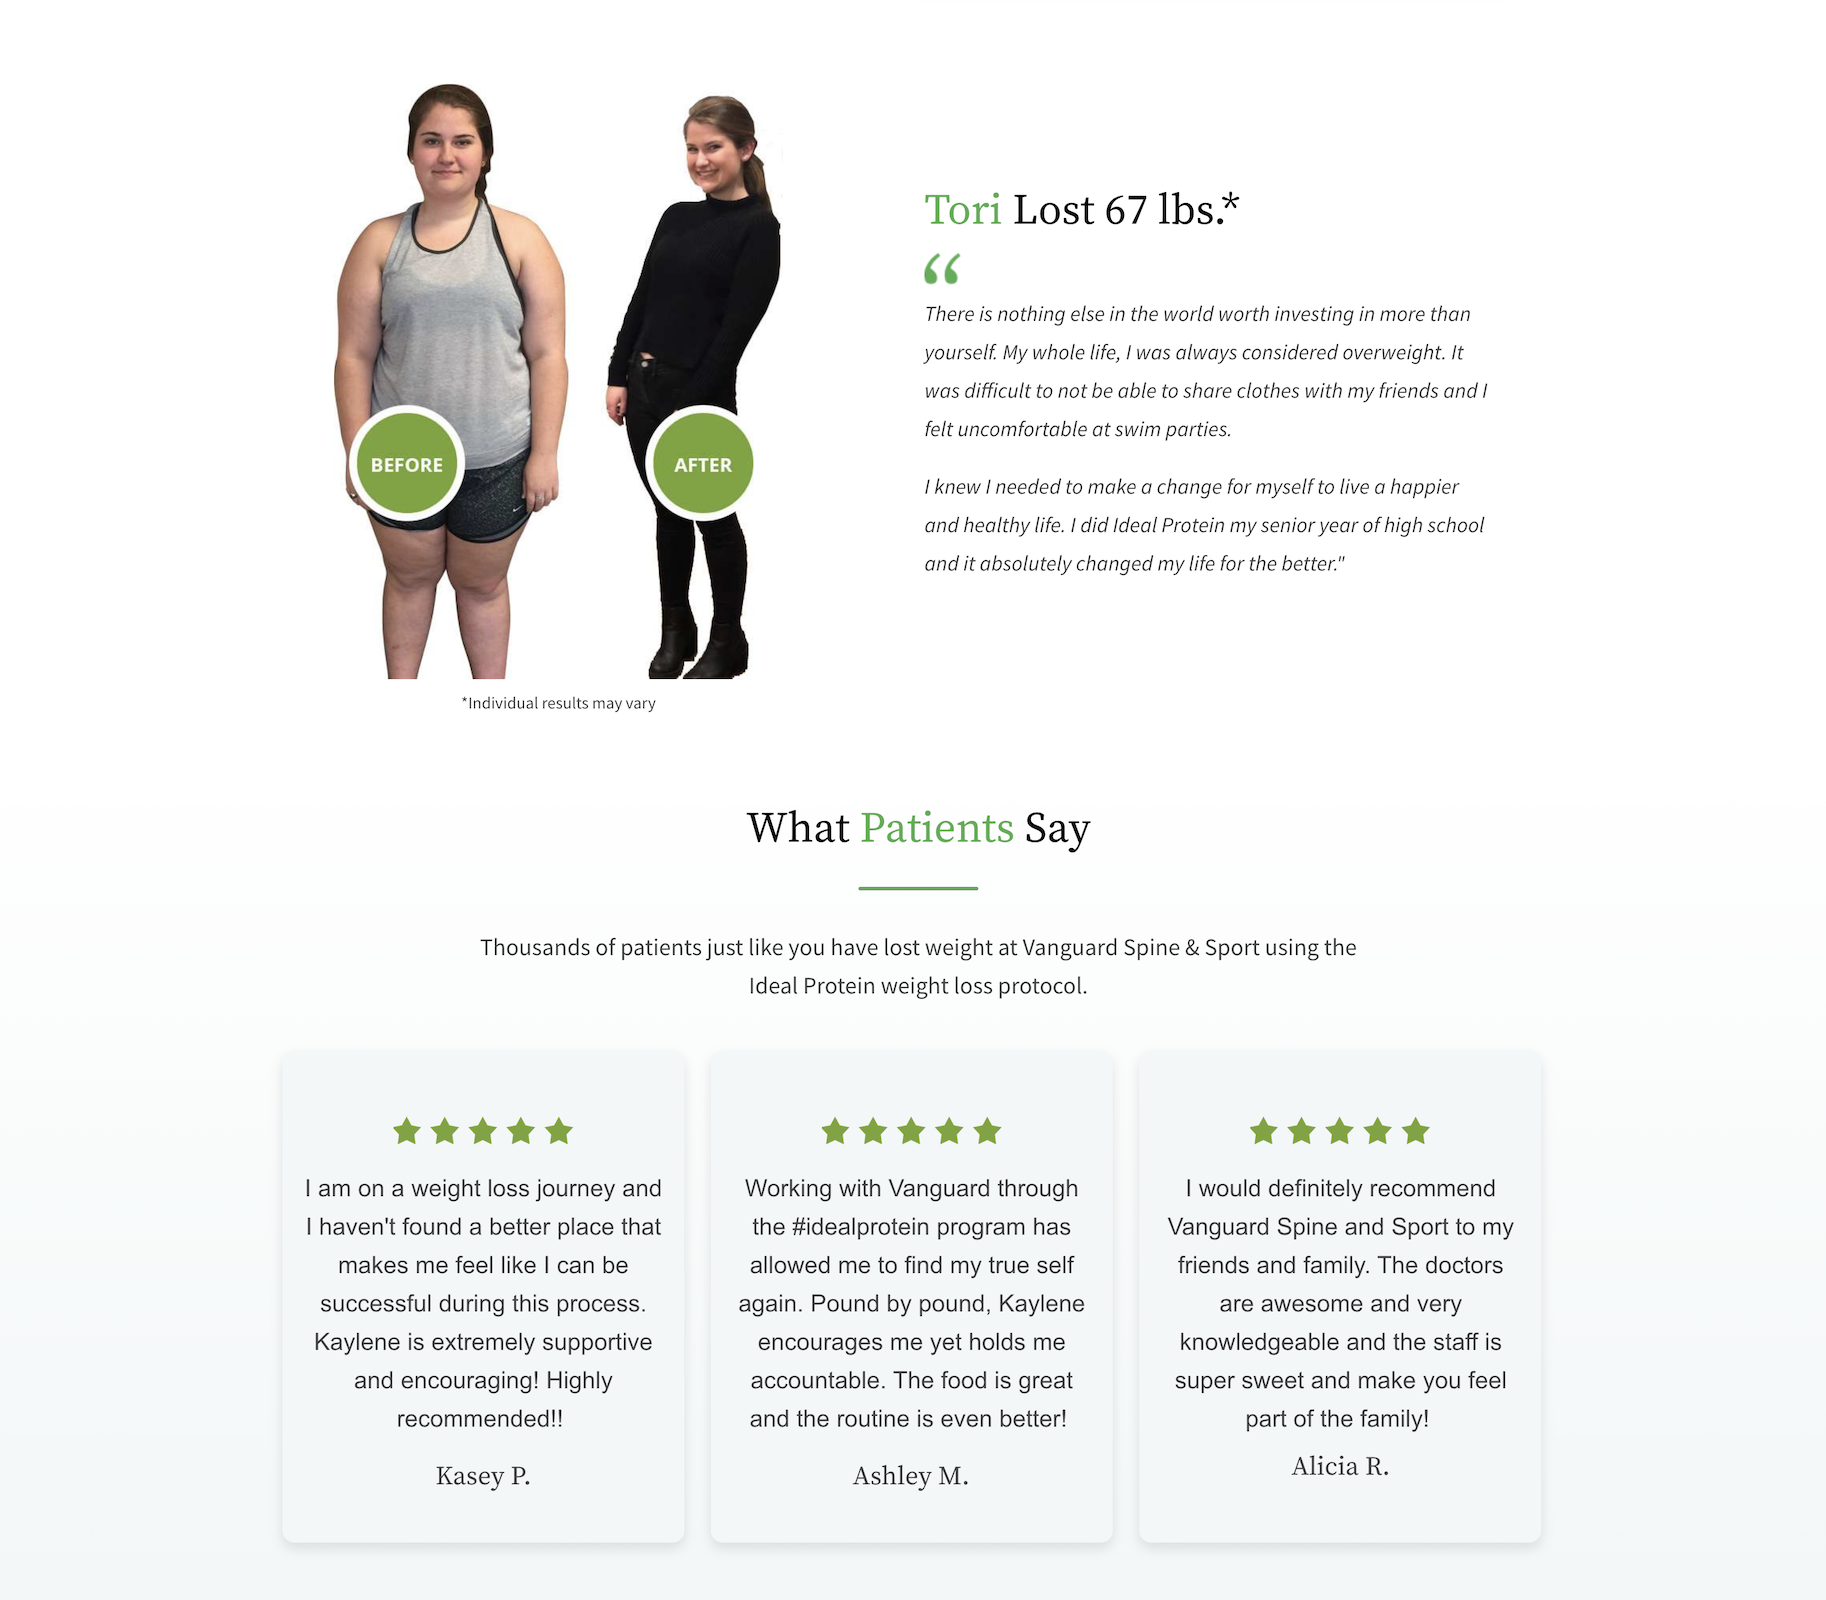 weight loss clinic landing page example - illustrate transformation